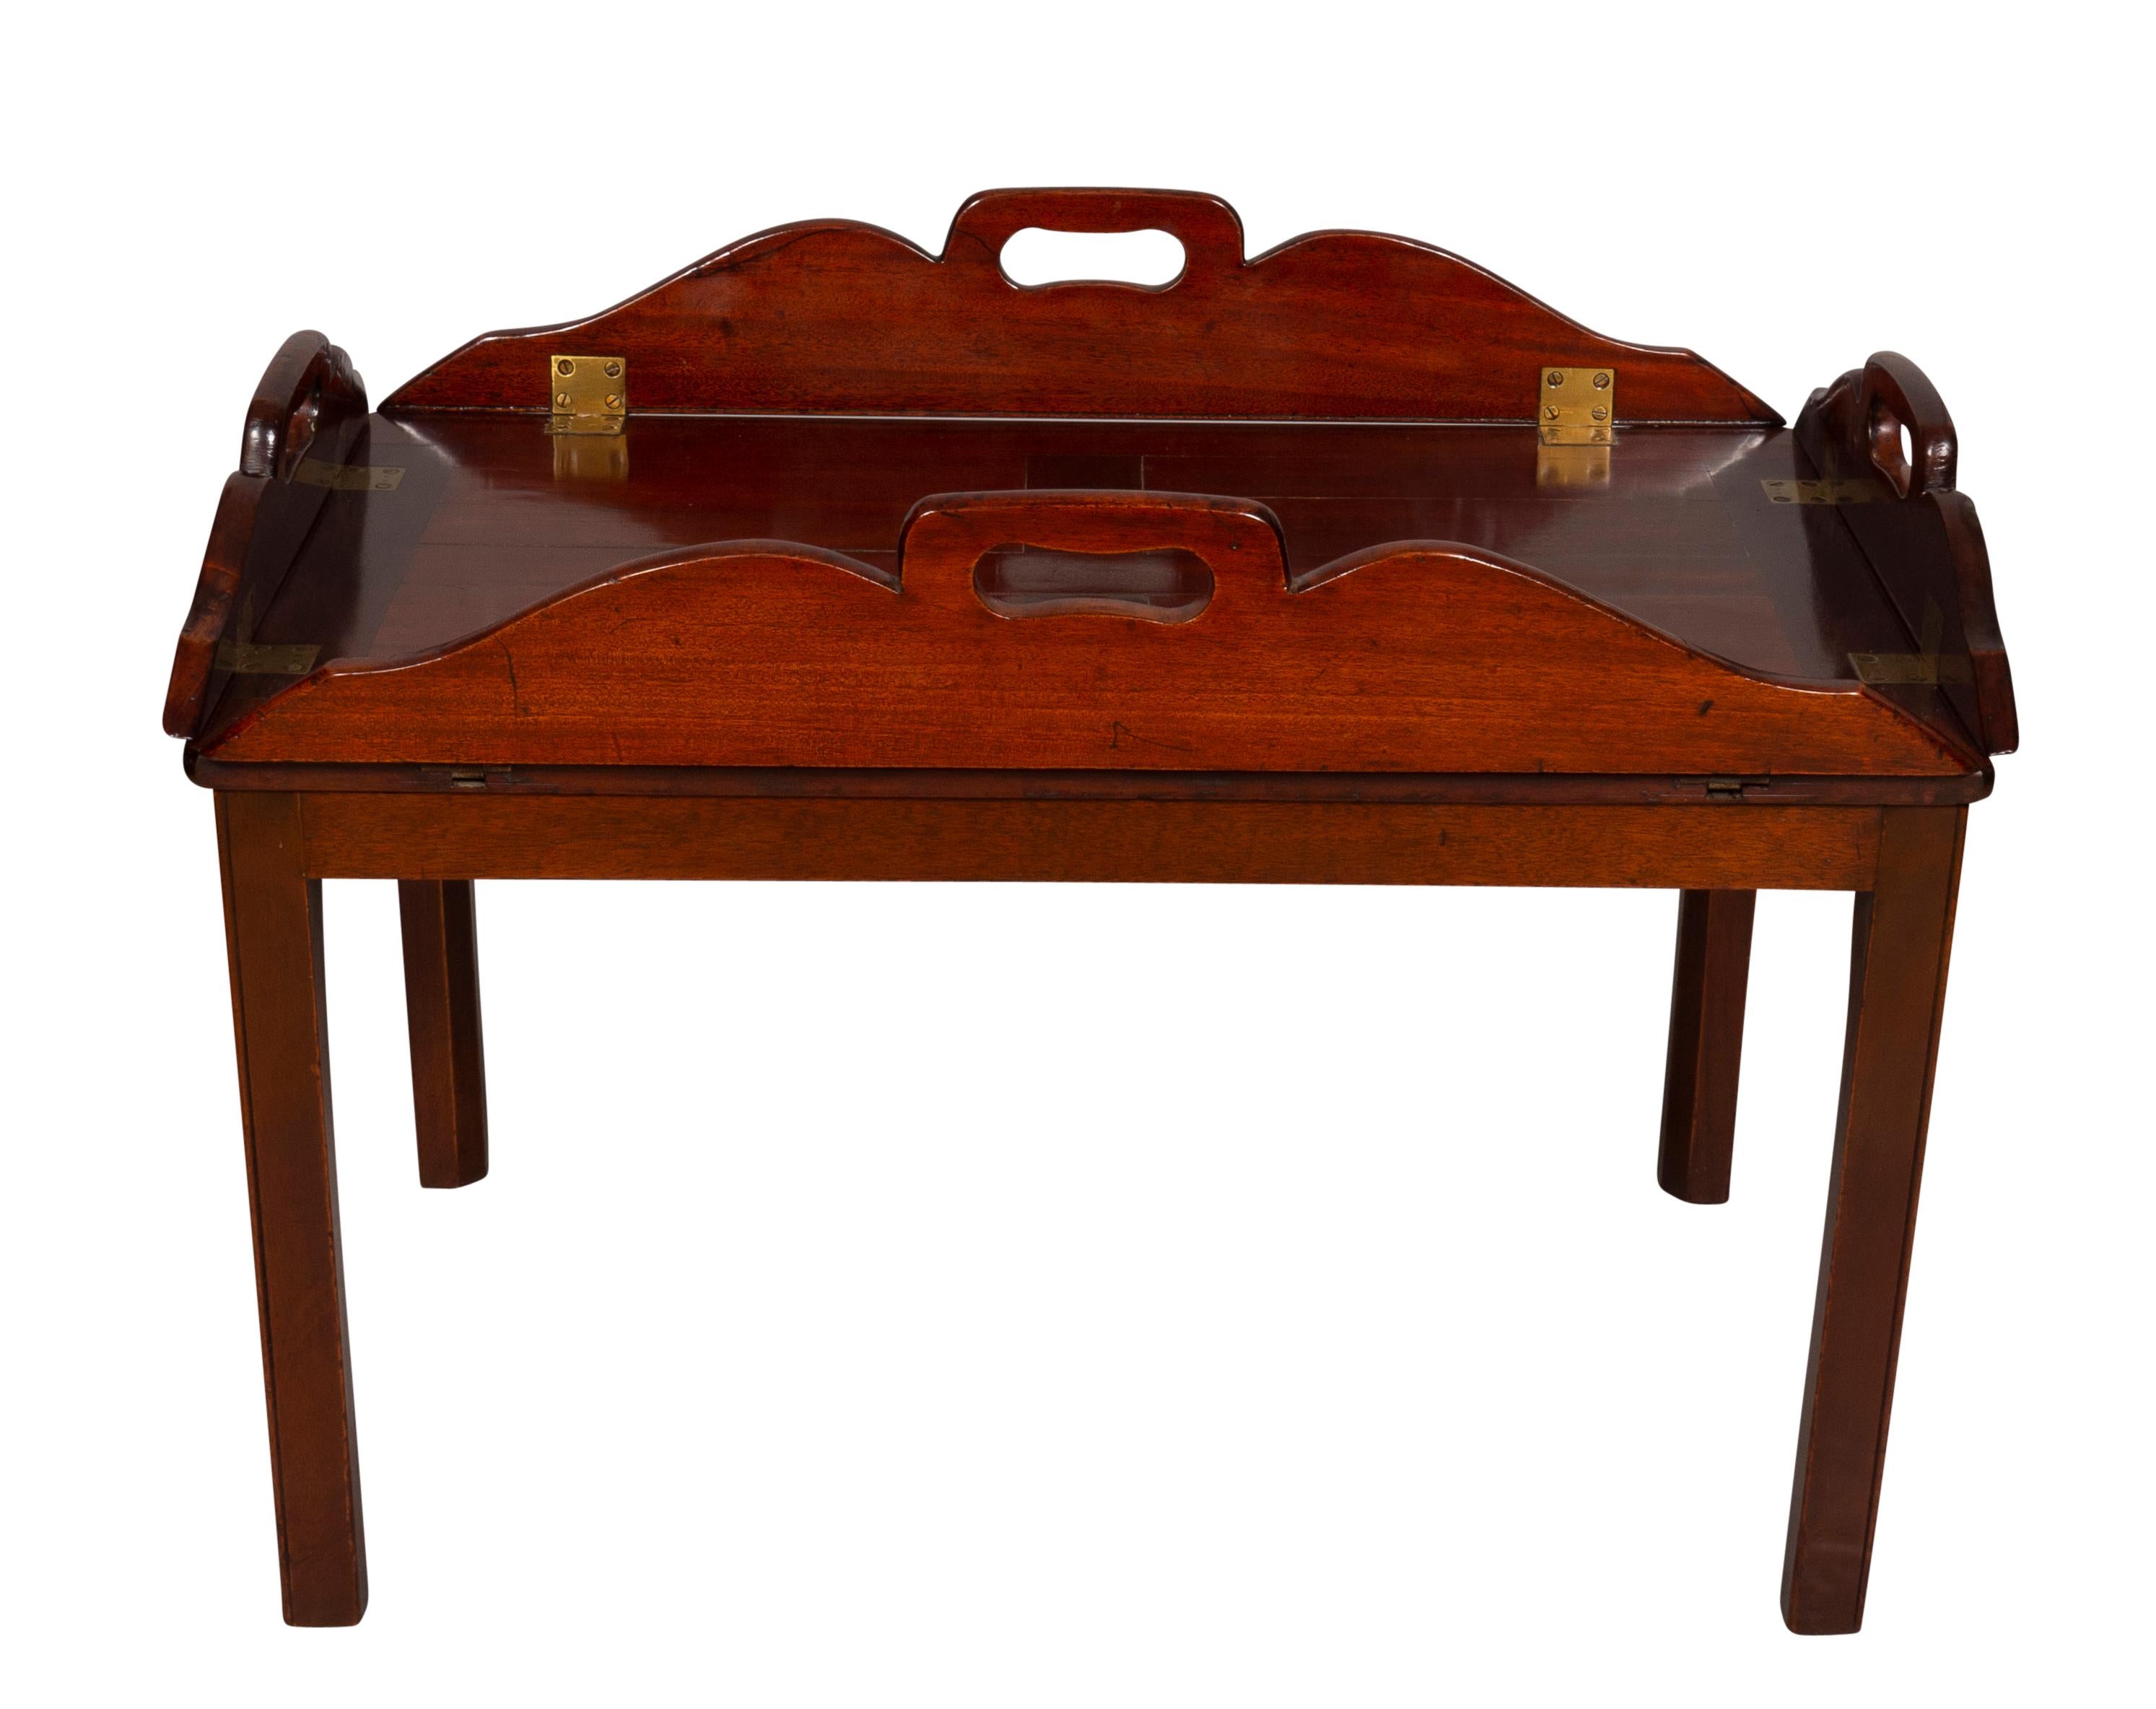 With panelled tray and shaped hinged sides with hand holds on a later base with square section legs. The hinged borders enabled the tray to be stored flat. These were used extensively from Chippendale's Director to the early Victorian era. Later